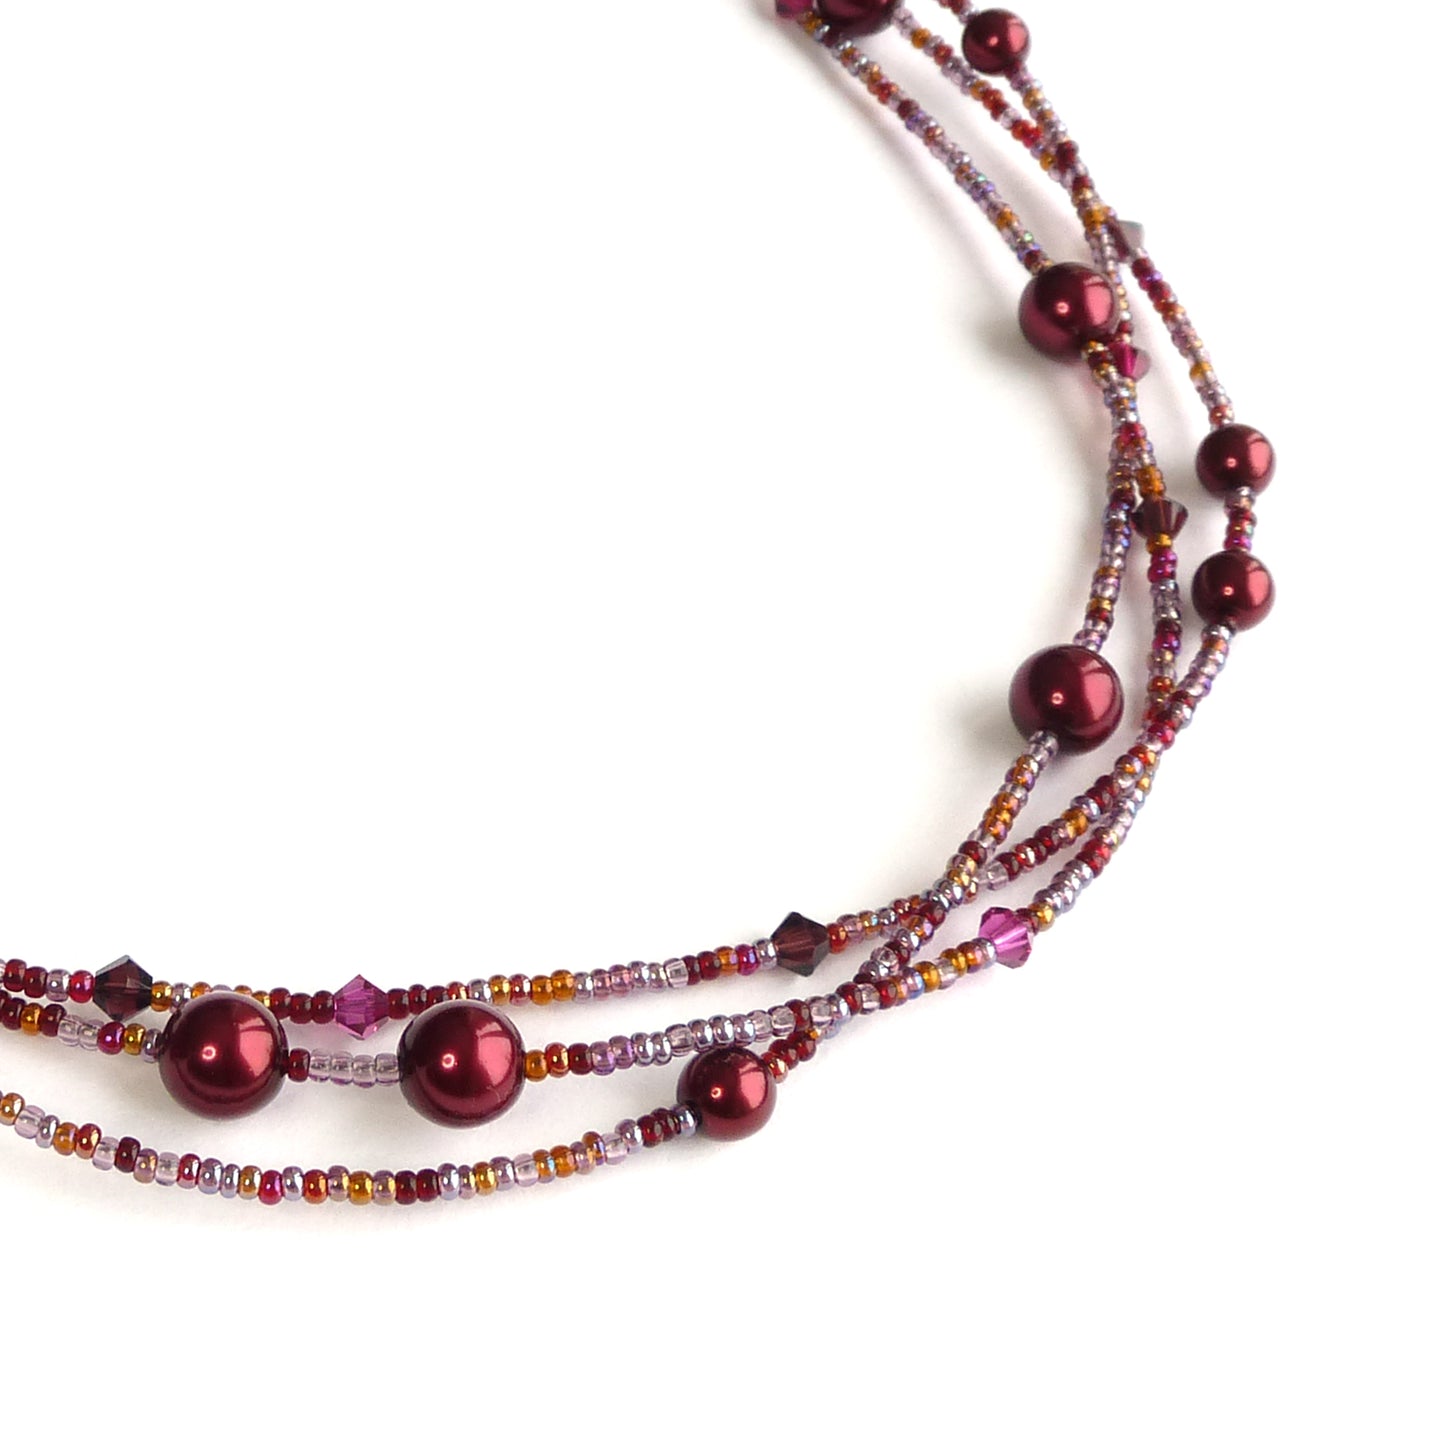 Twisted burgundy pearl necklace